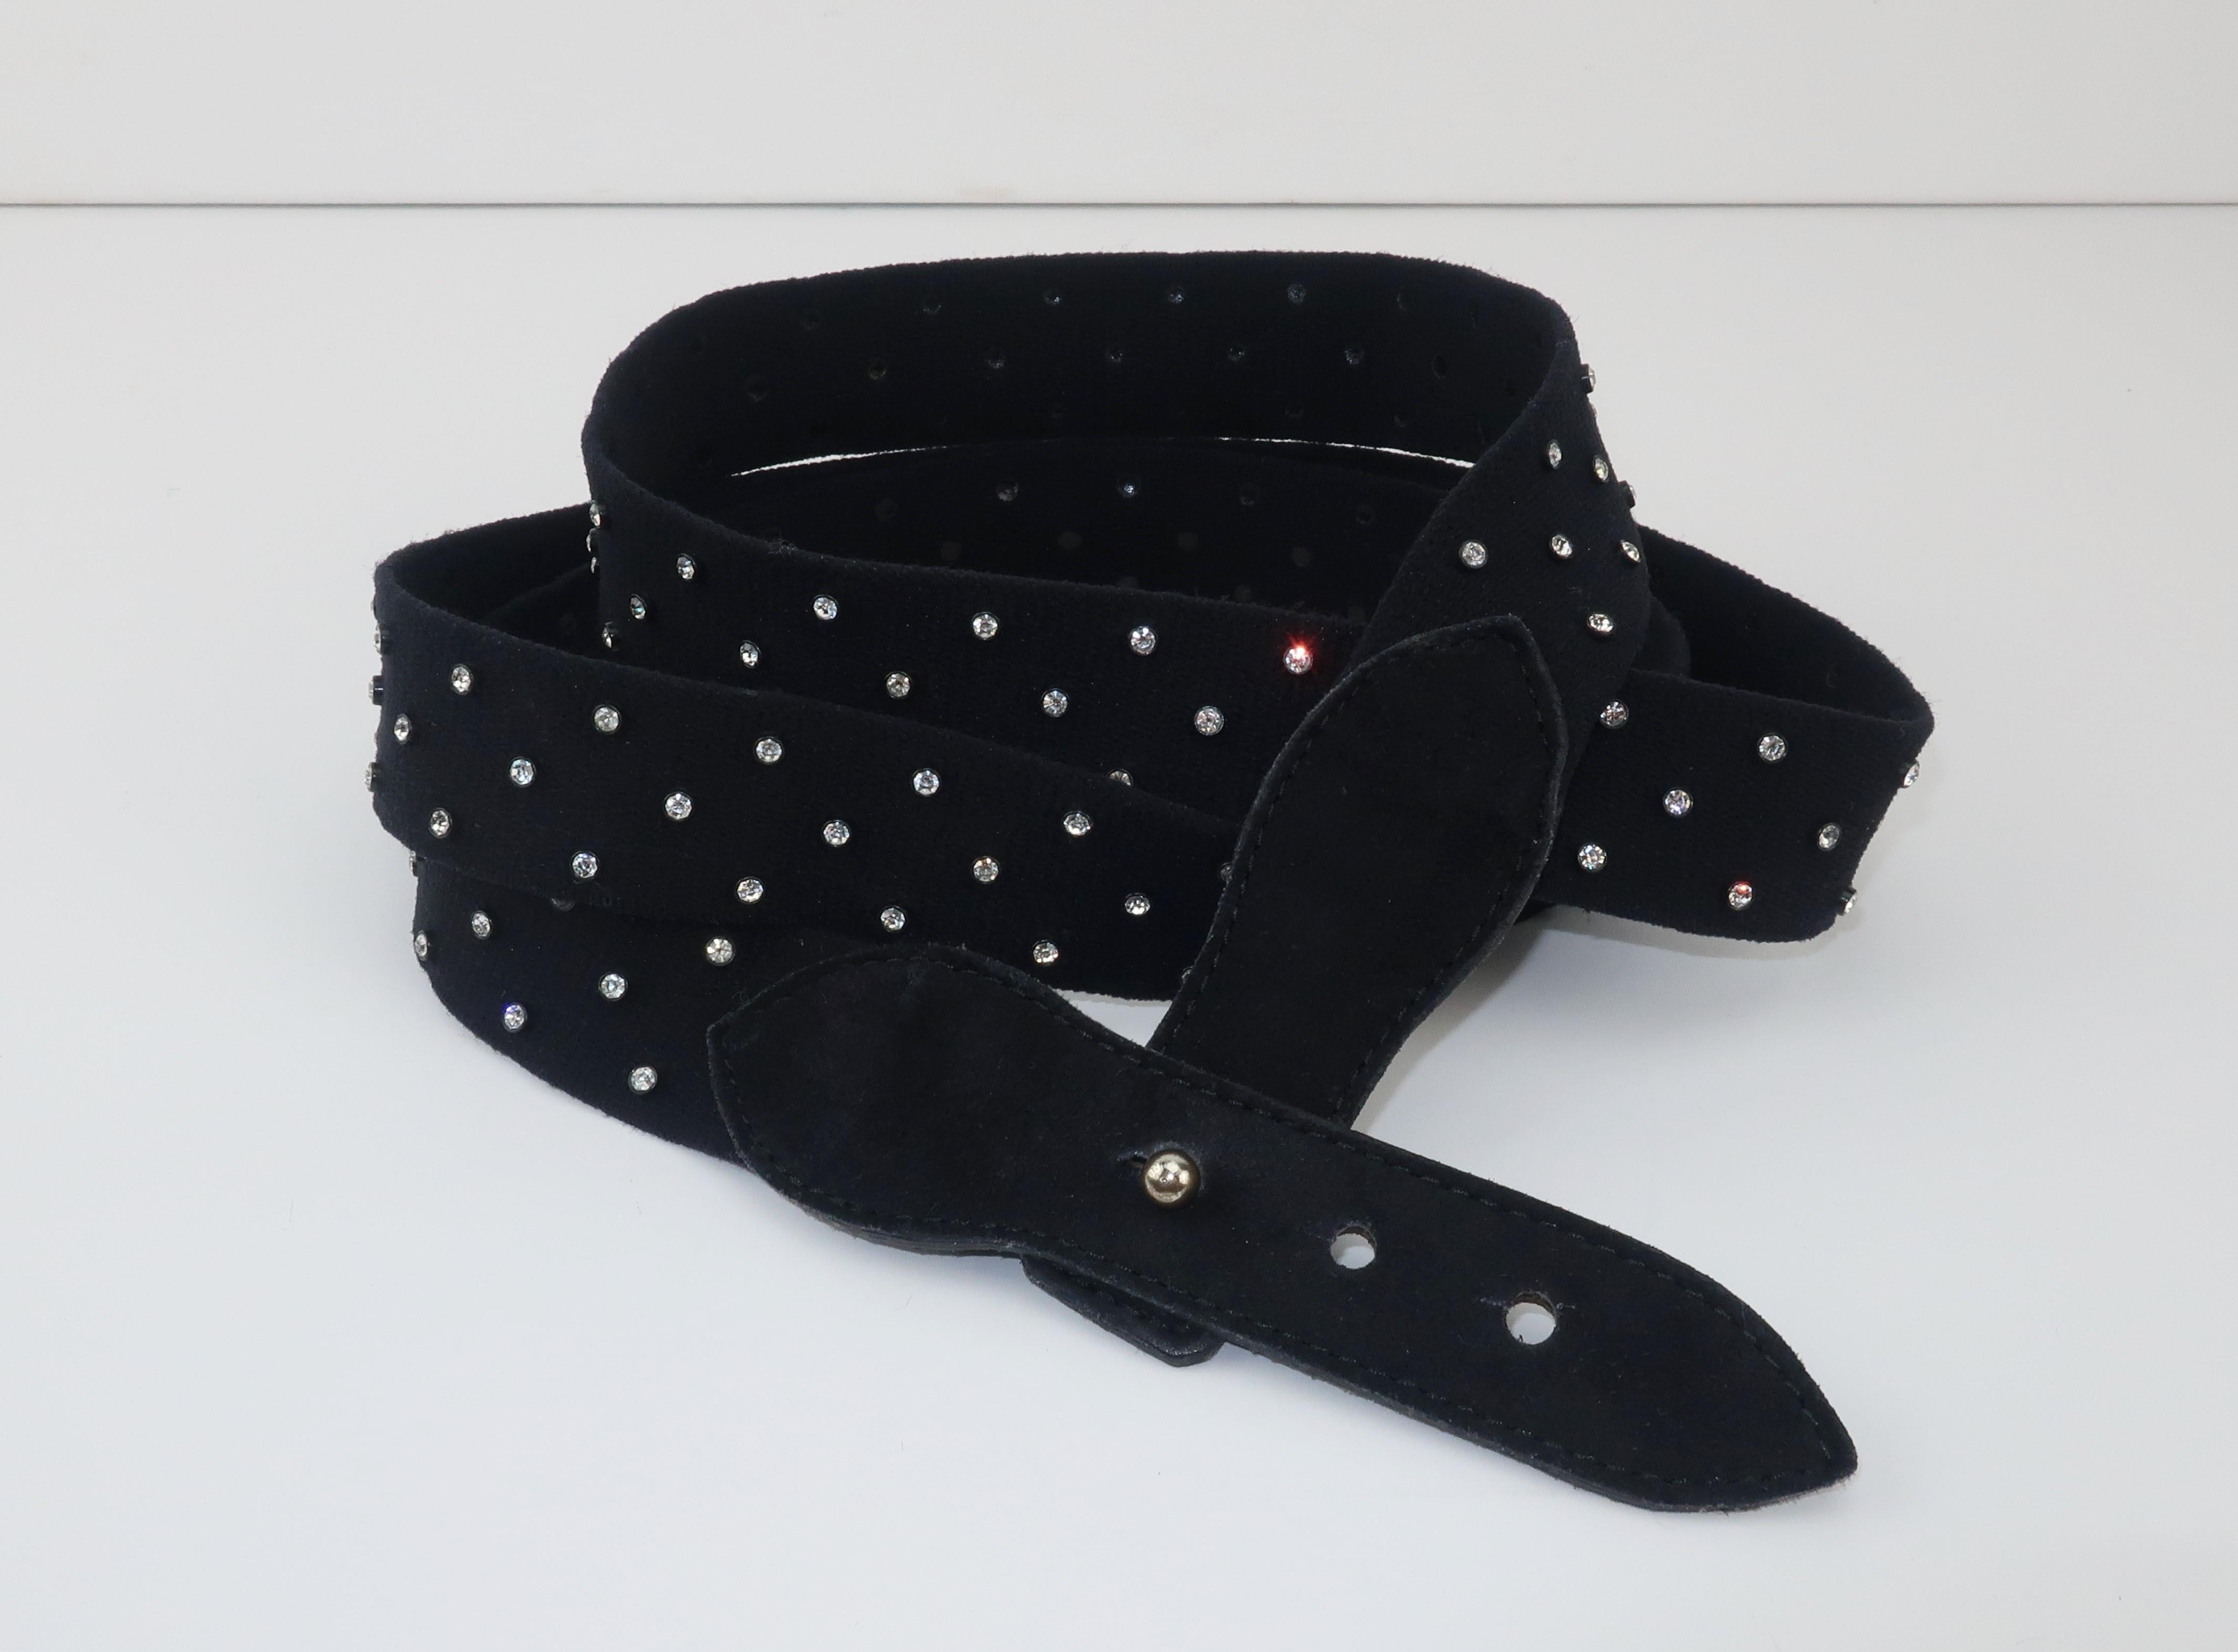 A unique Sonia Rykiel belt combining a crystal rhinestone black stretch body with suede tack style adjustable buckle.  The belt is designed to wrap and can be worn in a number of imaginative ways including the option to create a harness effect. 